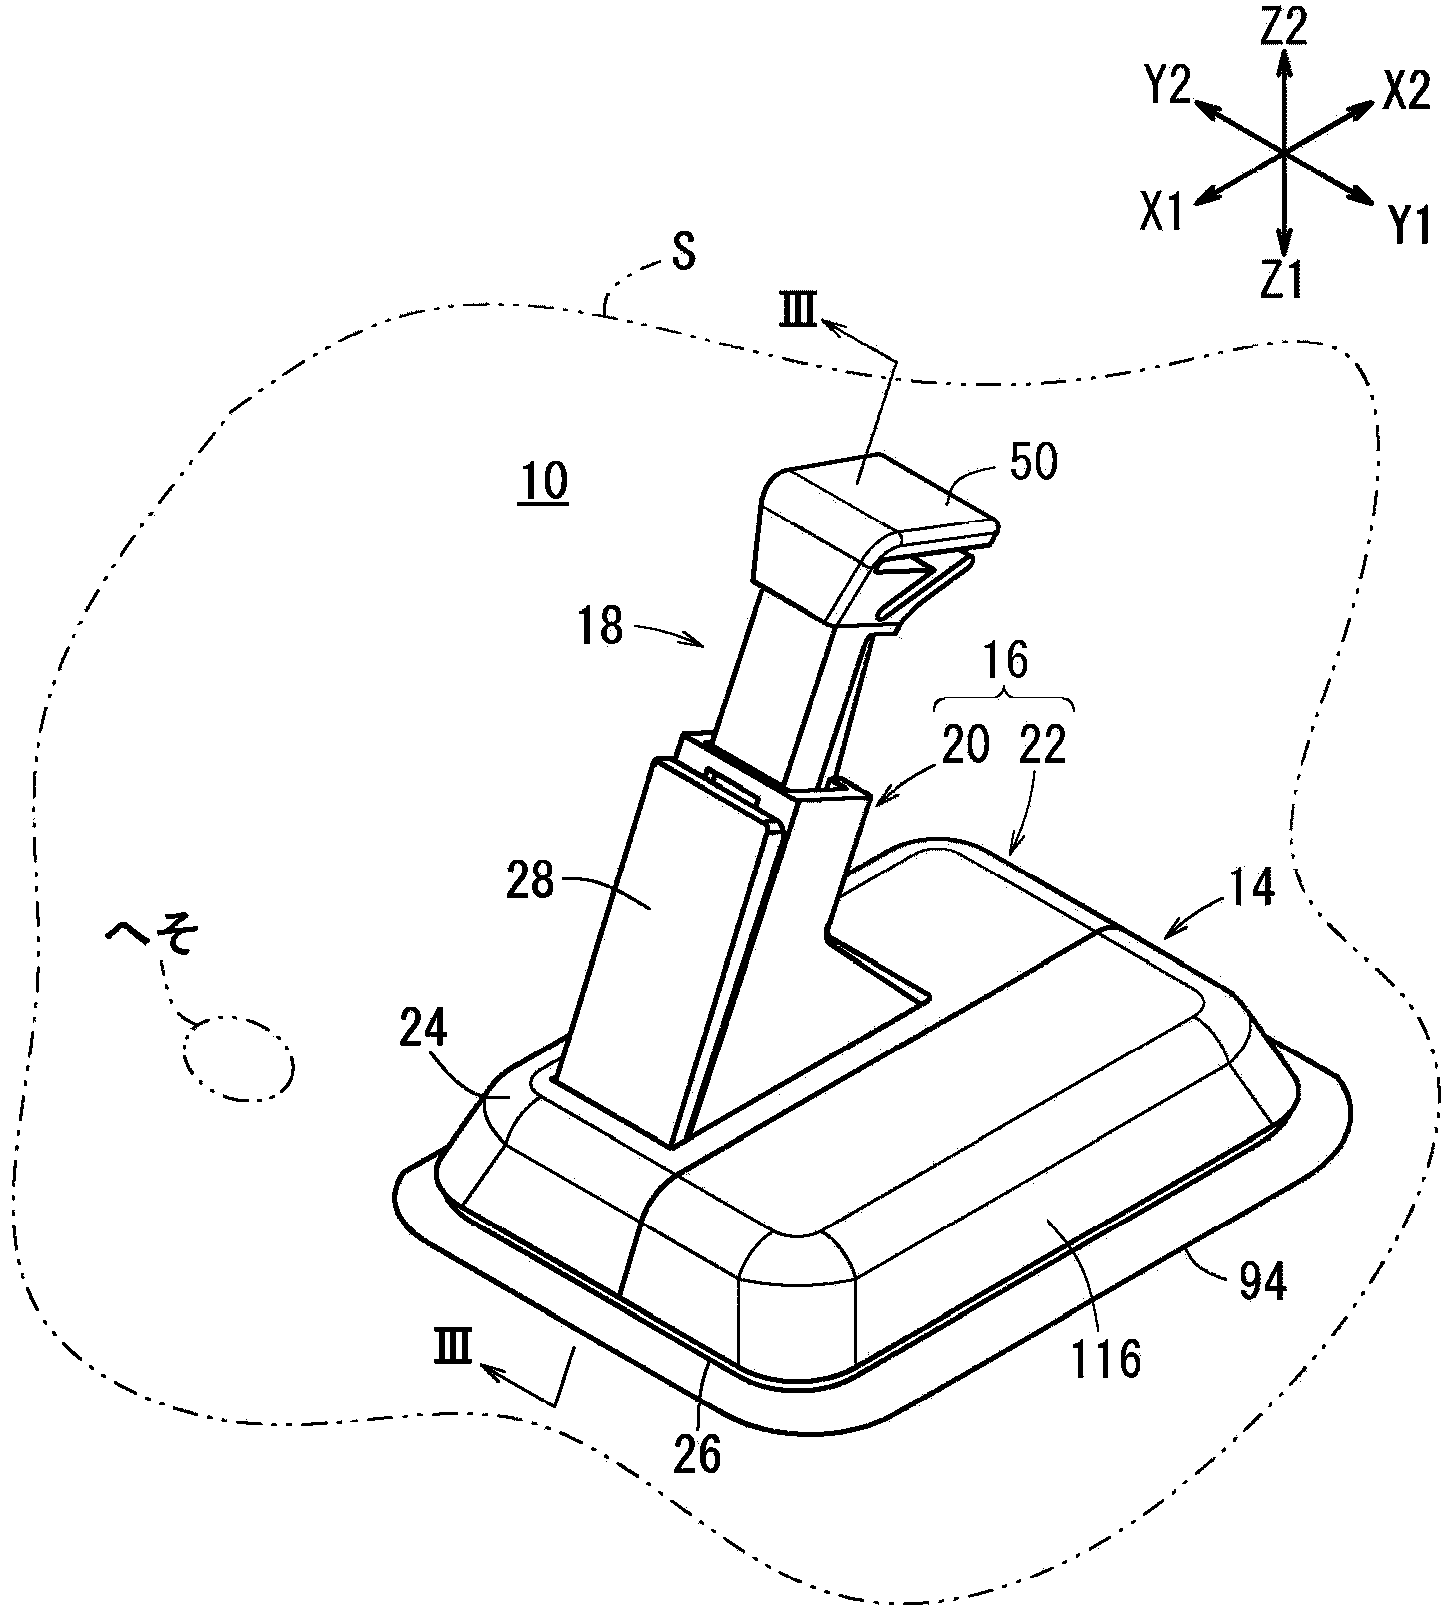 Sensor insertion device and method for operating said device